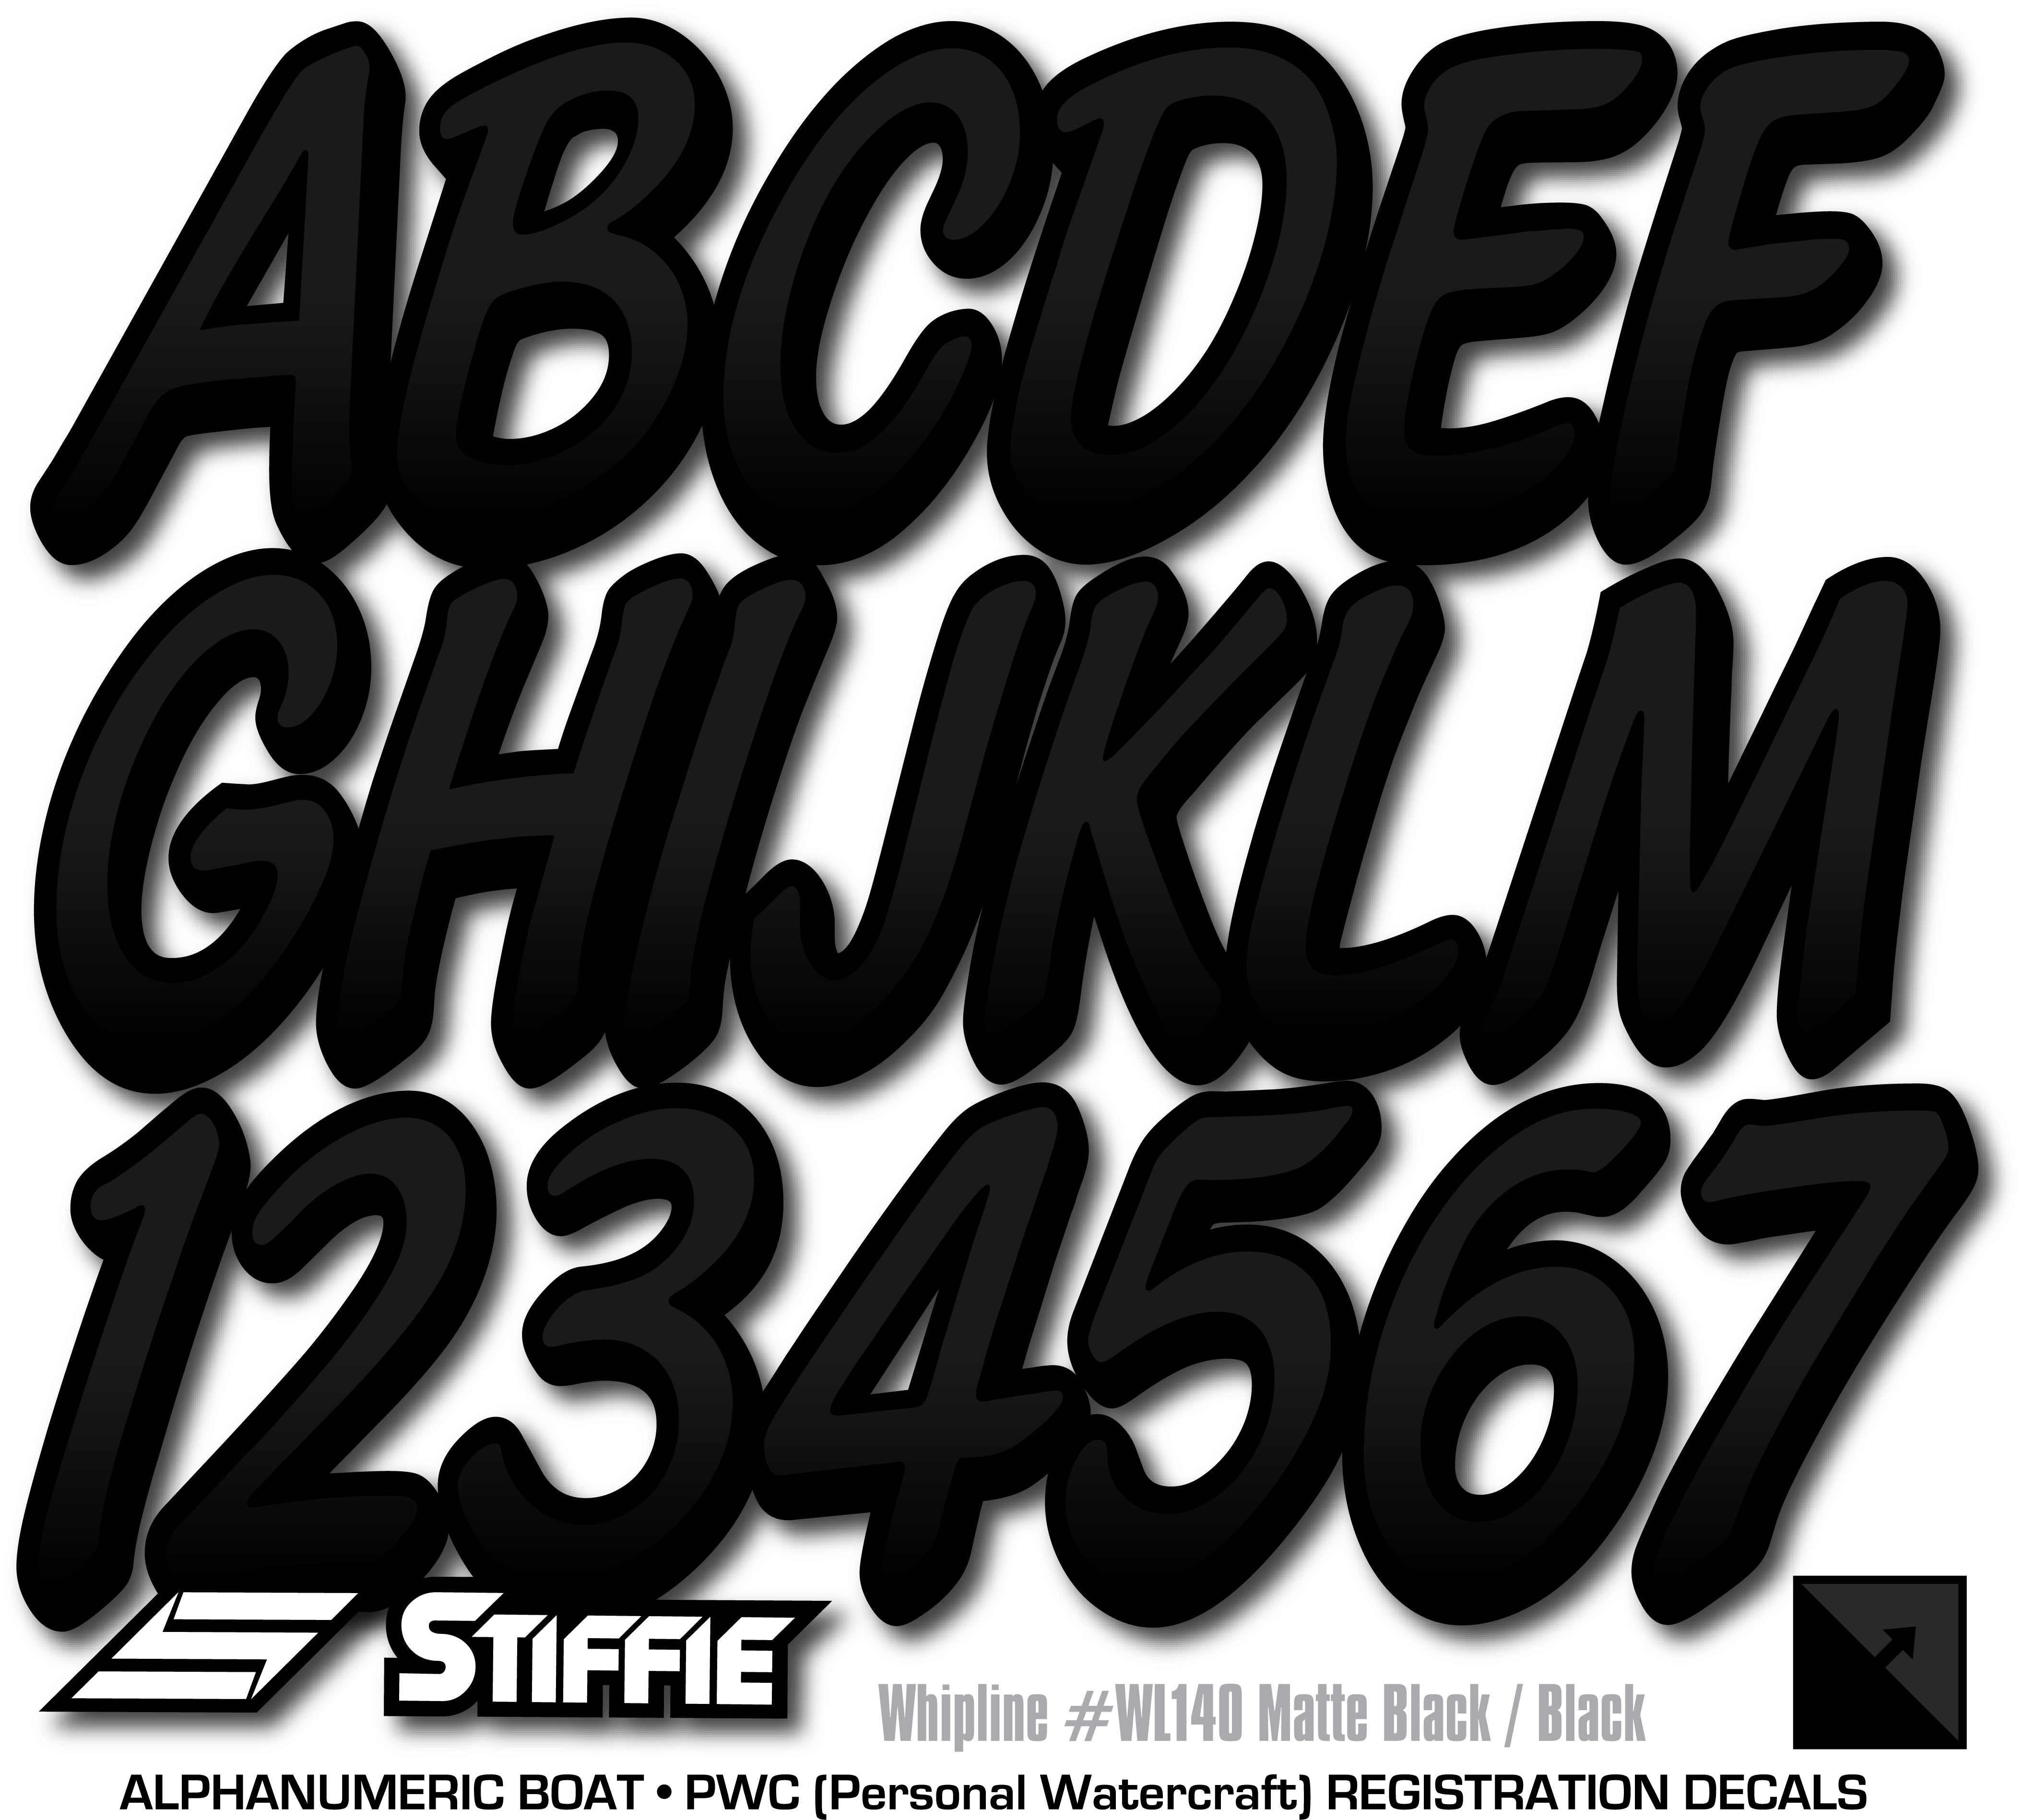 Stiffie Whipline Matte Black/Black 3" Alpha-Numeric Registration Identification Numbers Stickers Decals for Boats & Personal Watercraft